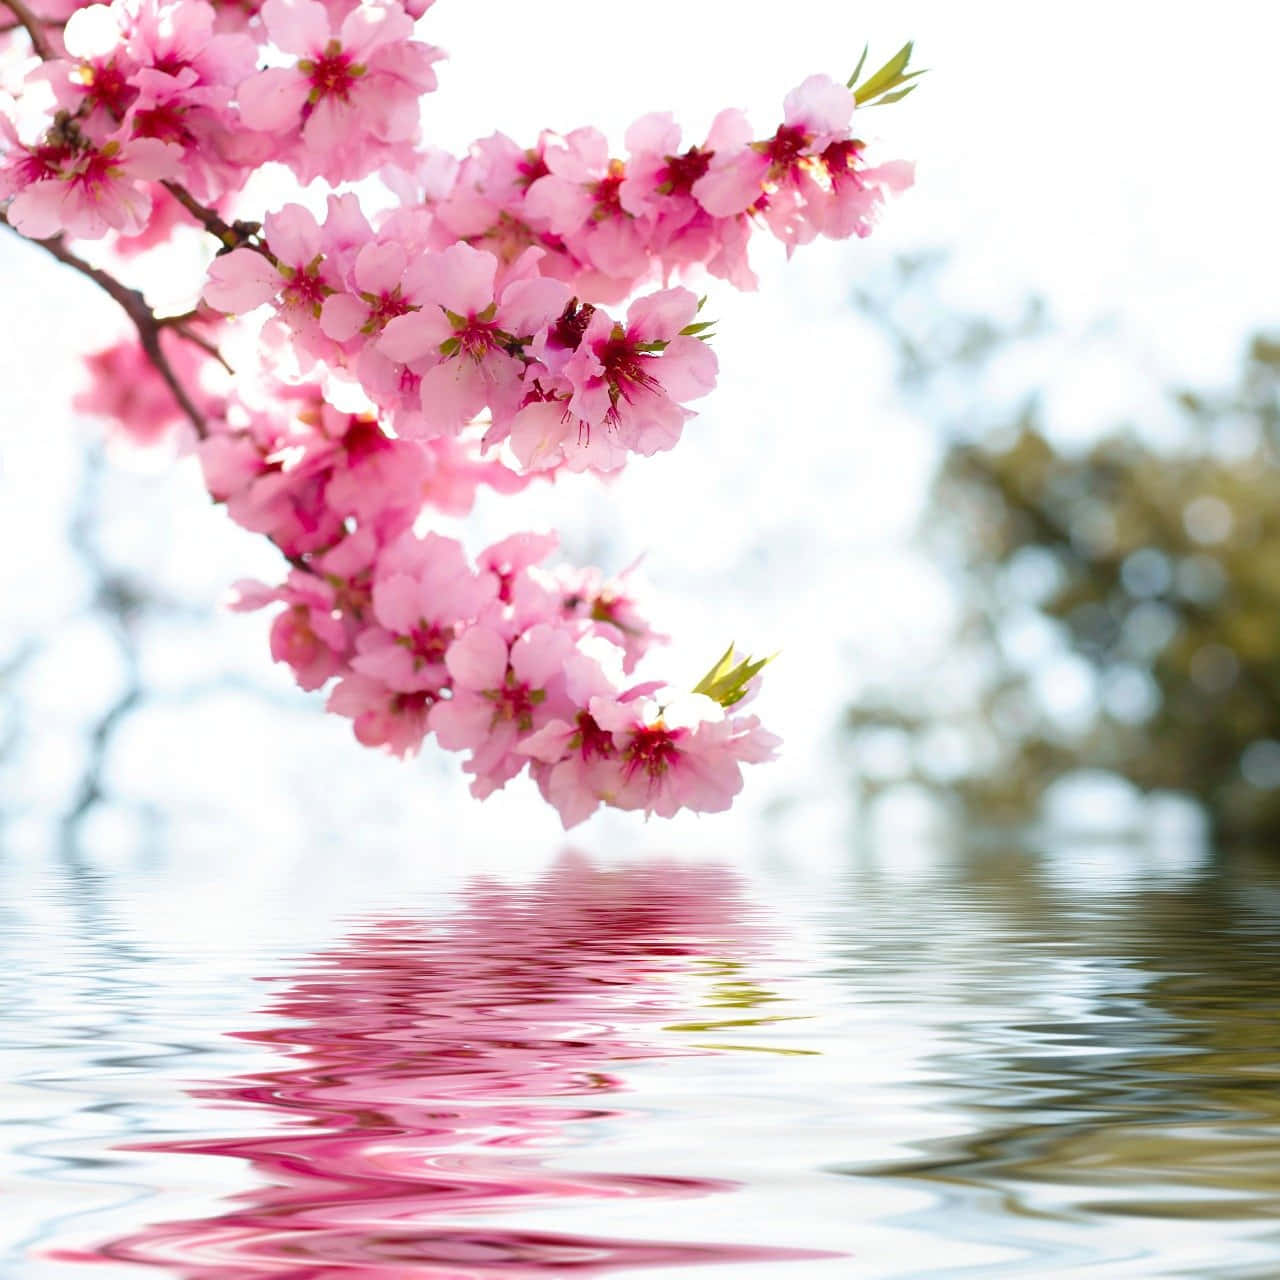 Pink Flowers Are Reflected In Water